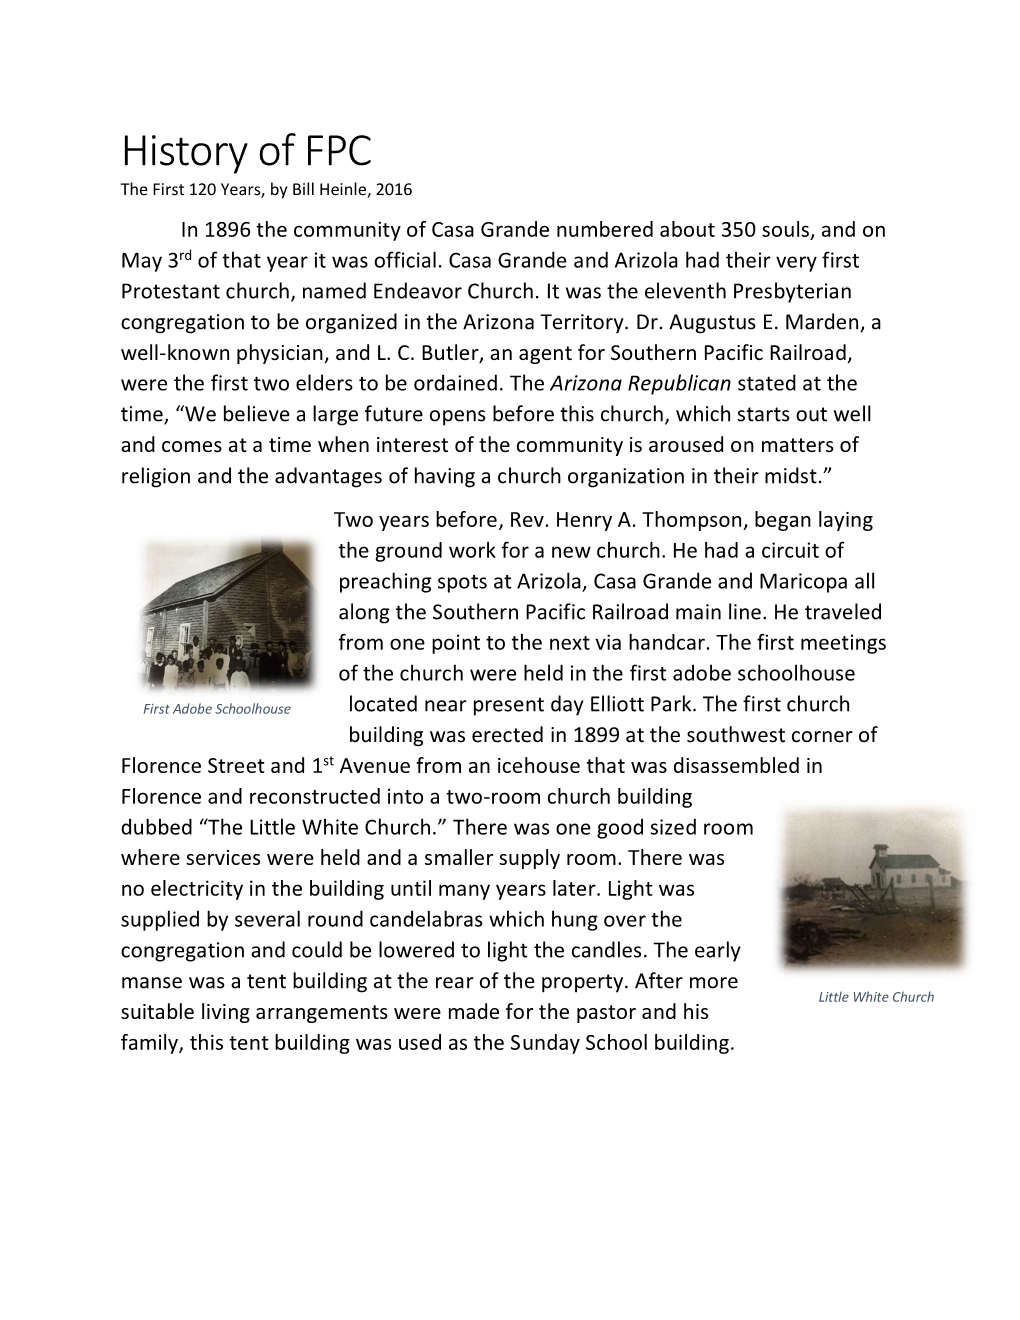 History of FPC the First 120 Years, by Bill Heinle, 2016 in 1896 the Community of Casa Grande Numbered About 350 Souls, and on May 3Rd of That Year It Was Official